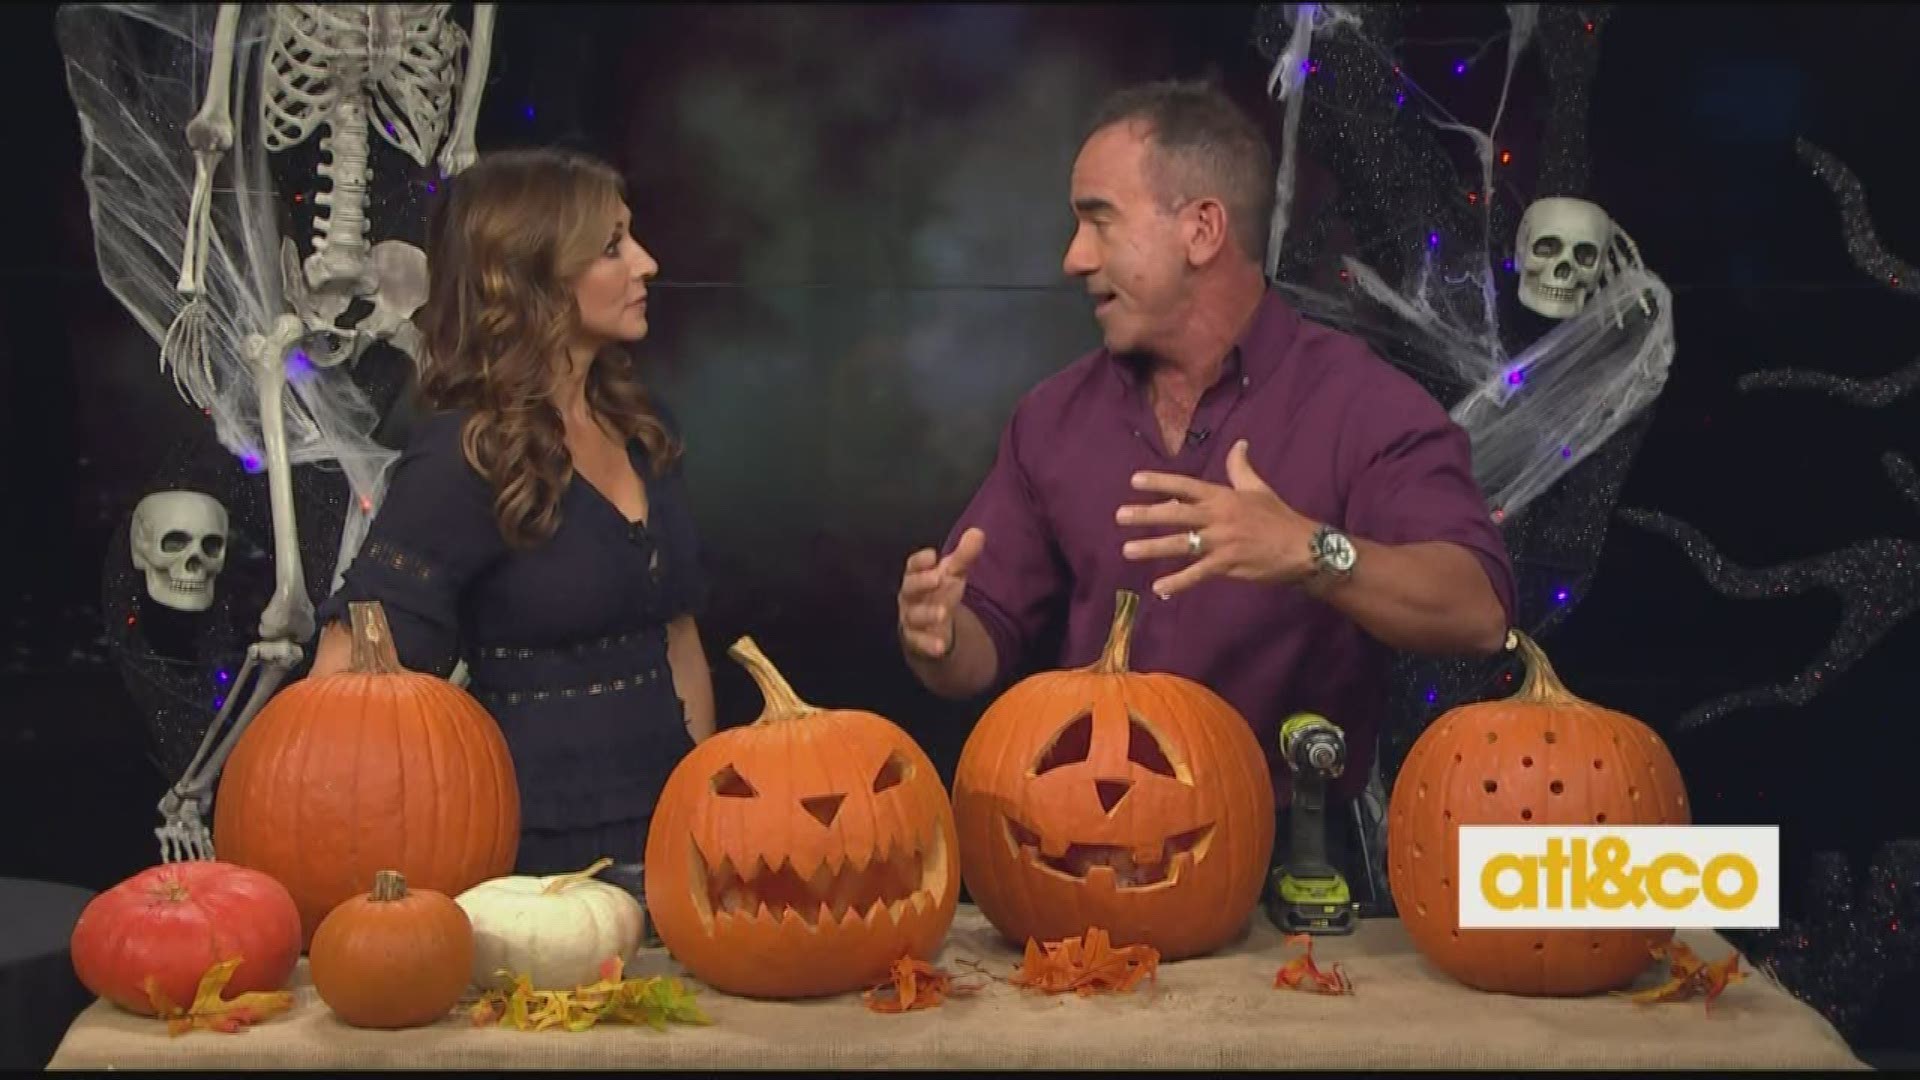 The Home Depot's Danny Watson shares top pumpkin carving tips on 'Atlanta & Company' with a spook-tacular display from Home Depot!